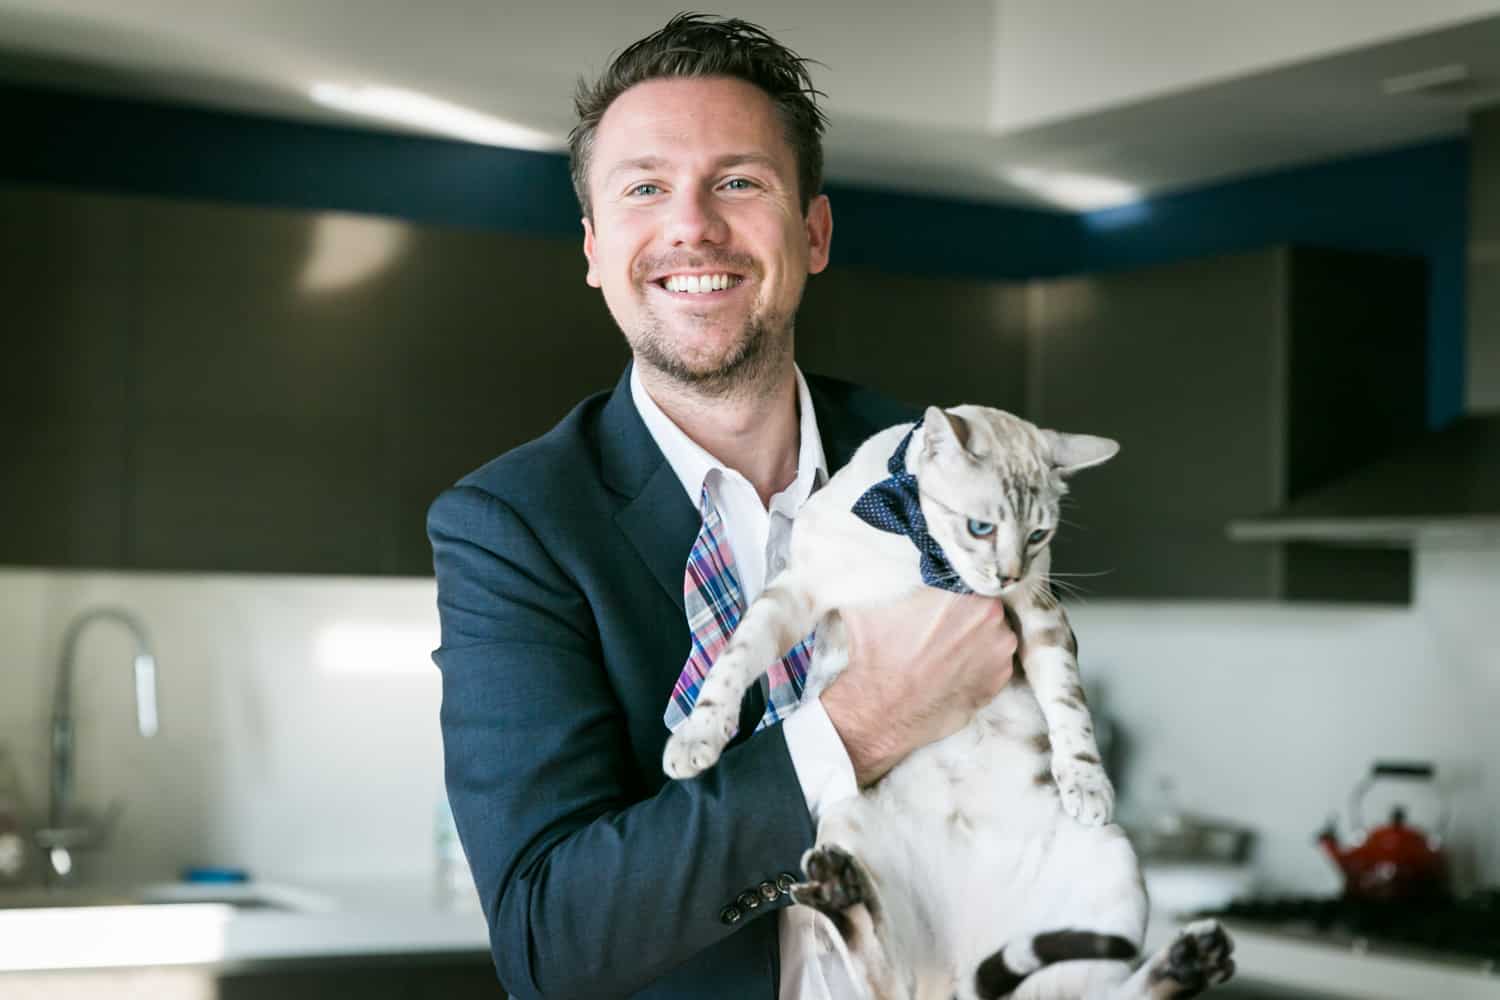 Groom holding cat wearing bowtie for an article on tips for including your pet in your wedding